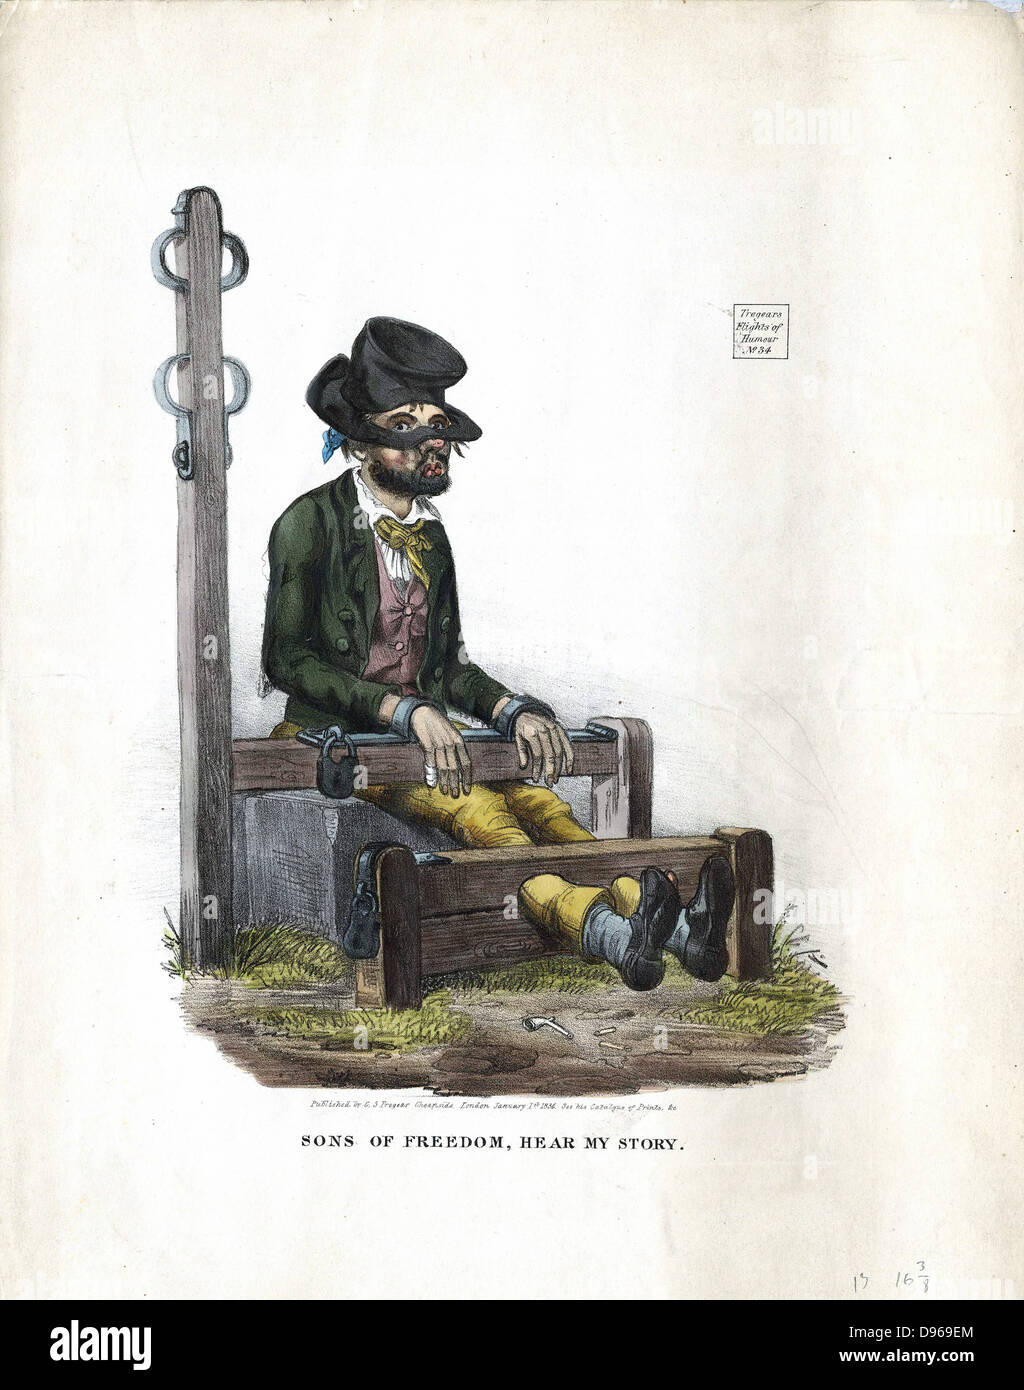 Man, looking as if he has been in a drunken brawl, serving his sentence in the village stocks. Attached to stocks is the pillory post with constraints for the arms. Lithograph London 1834 Stock Photo